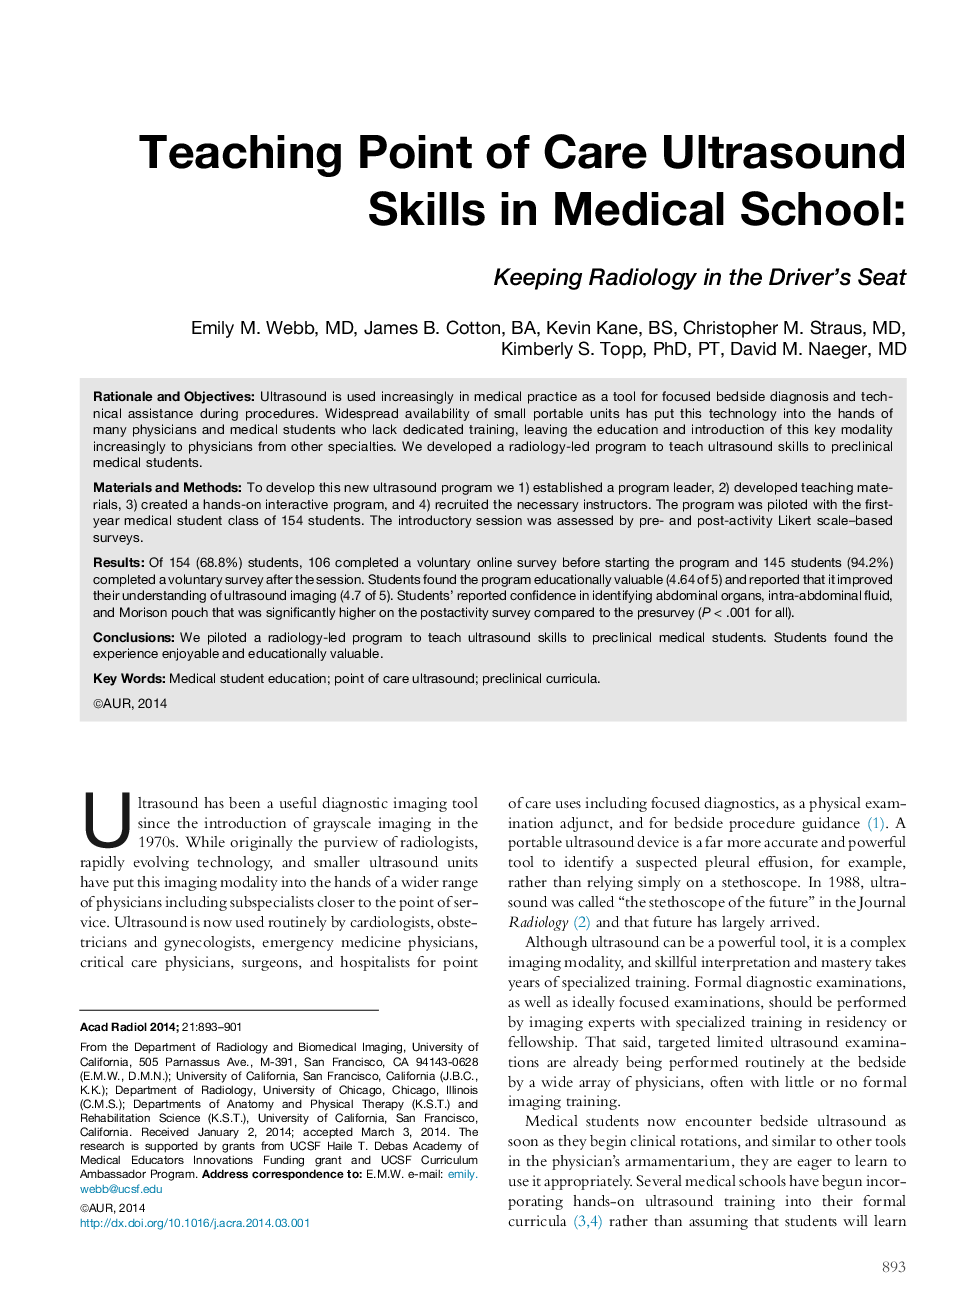 Teaching Point of Care Ultrasound Skills in Medical School